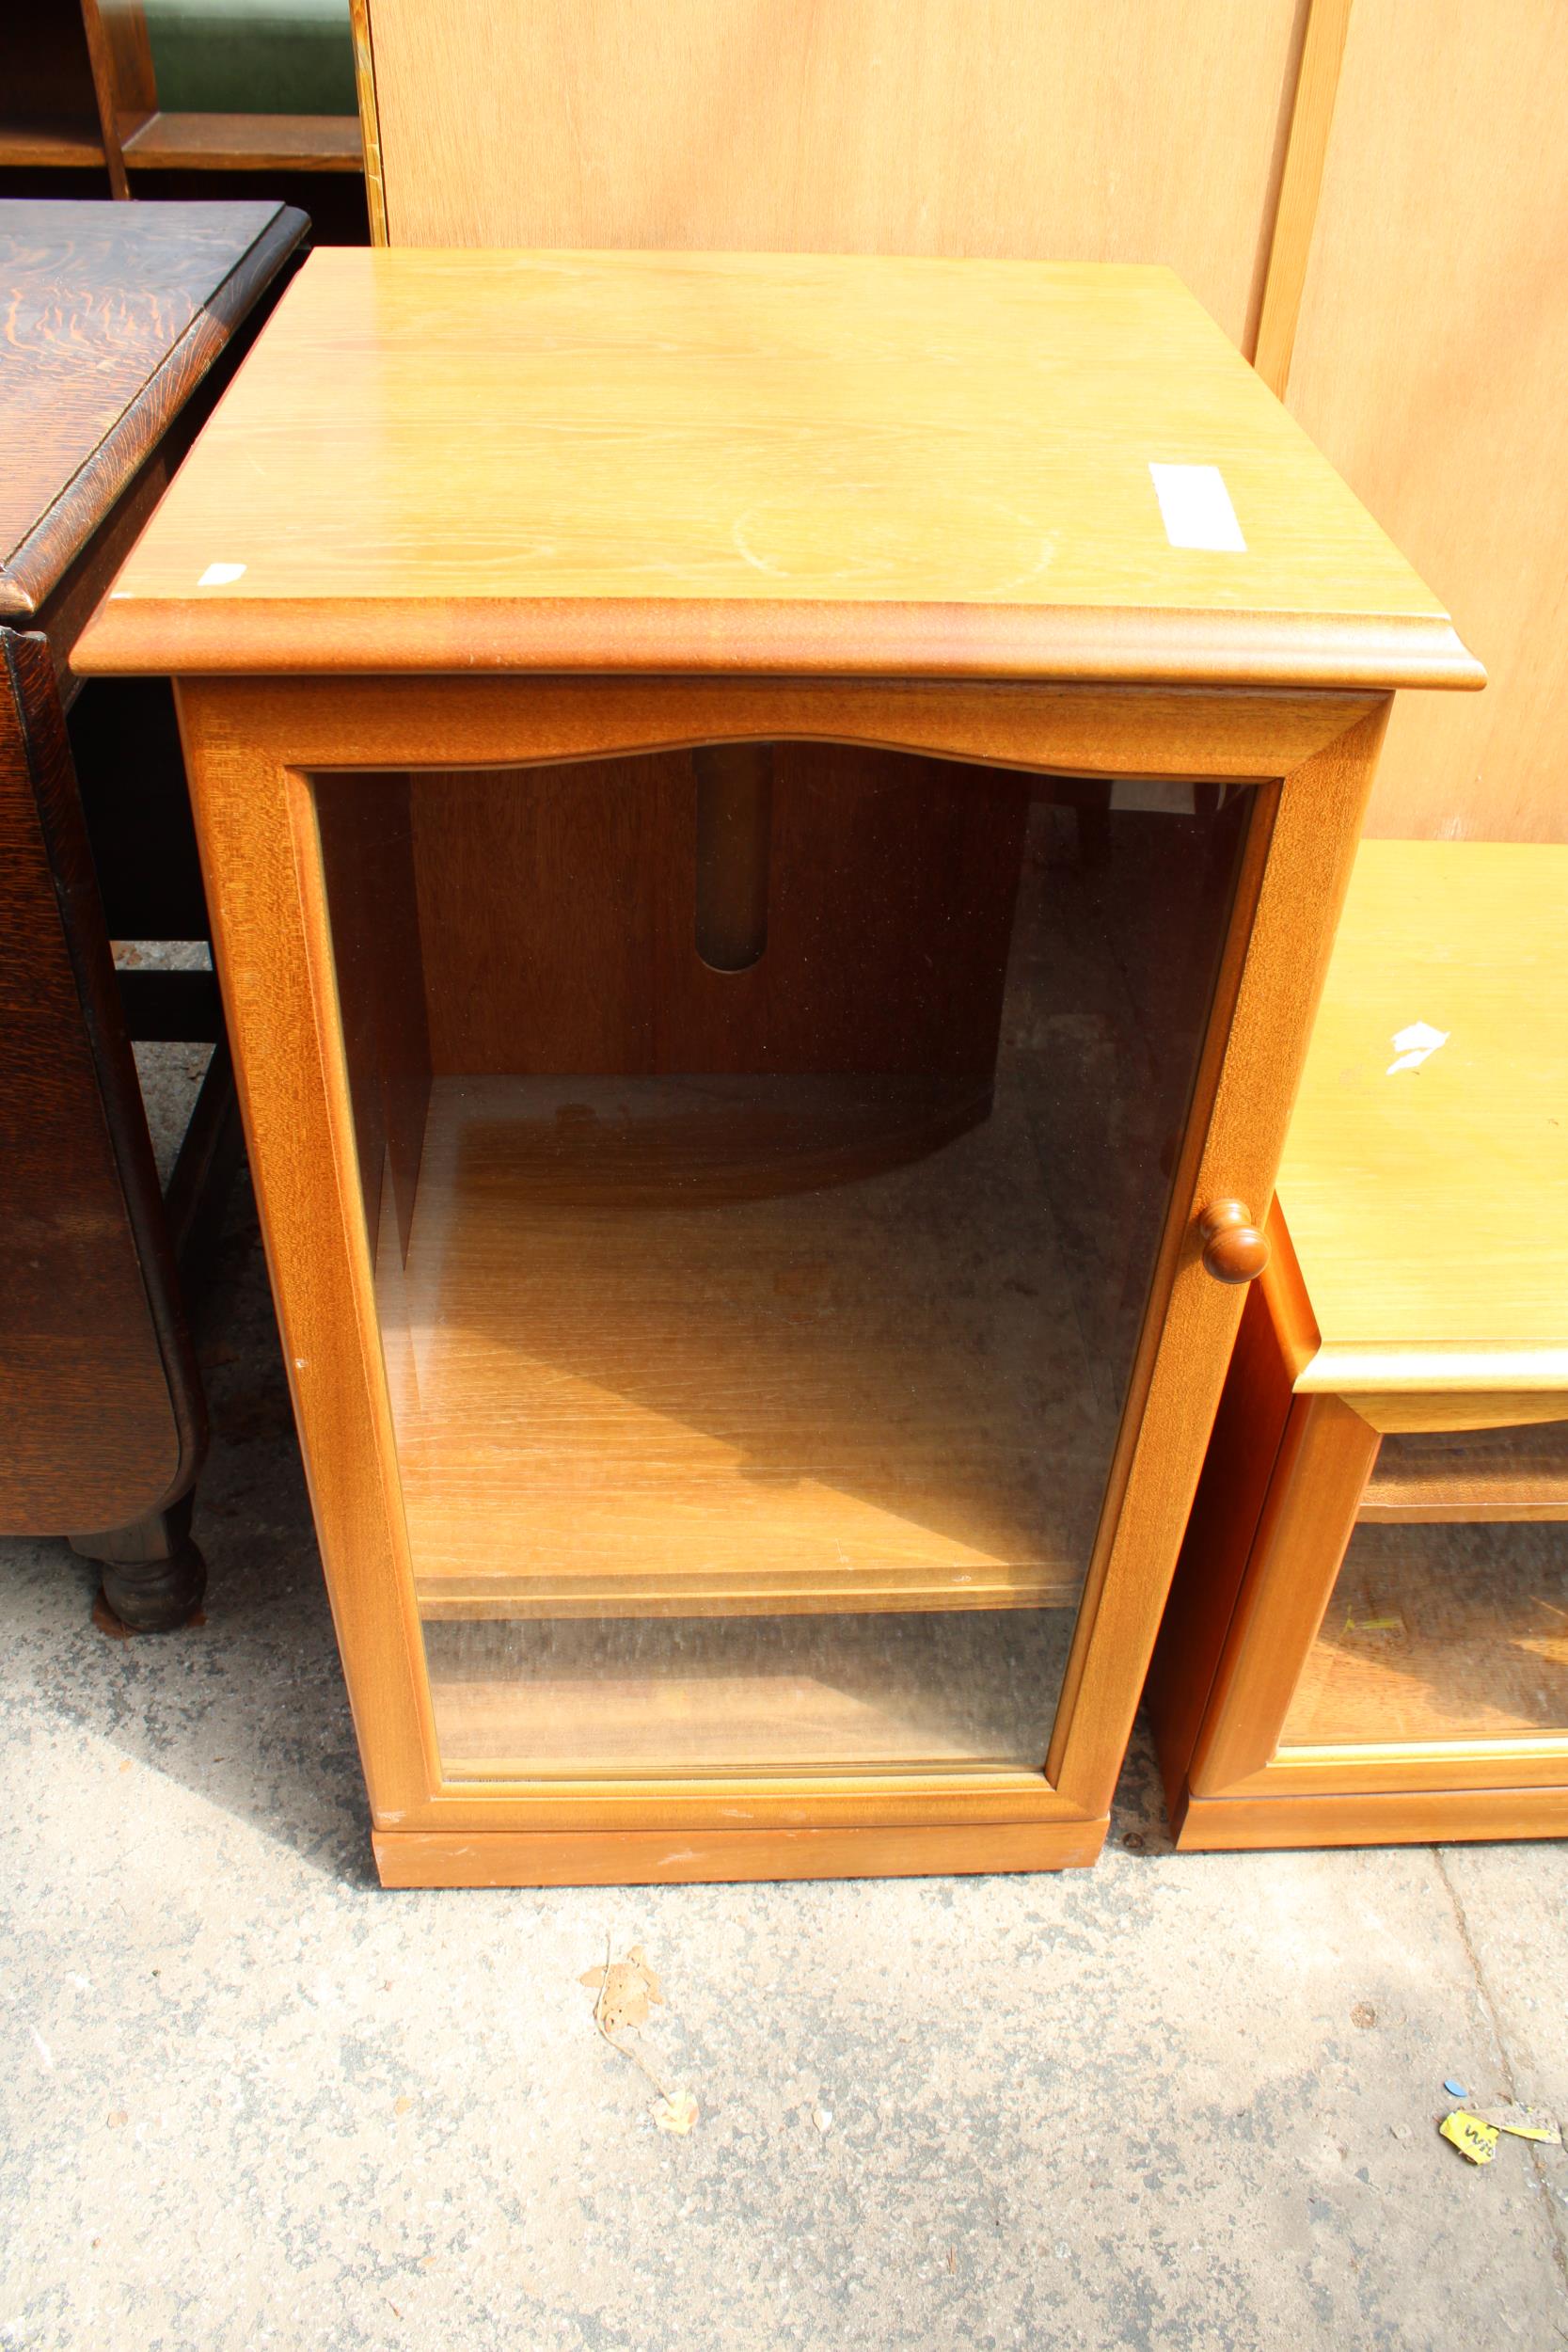 A RETRO TEAK SUTCLIFFE CABINET AND STAND - Image 2 of 3